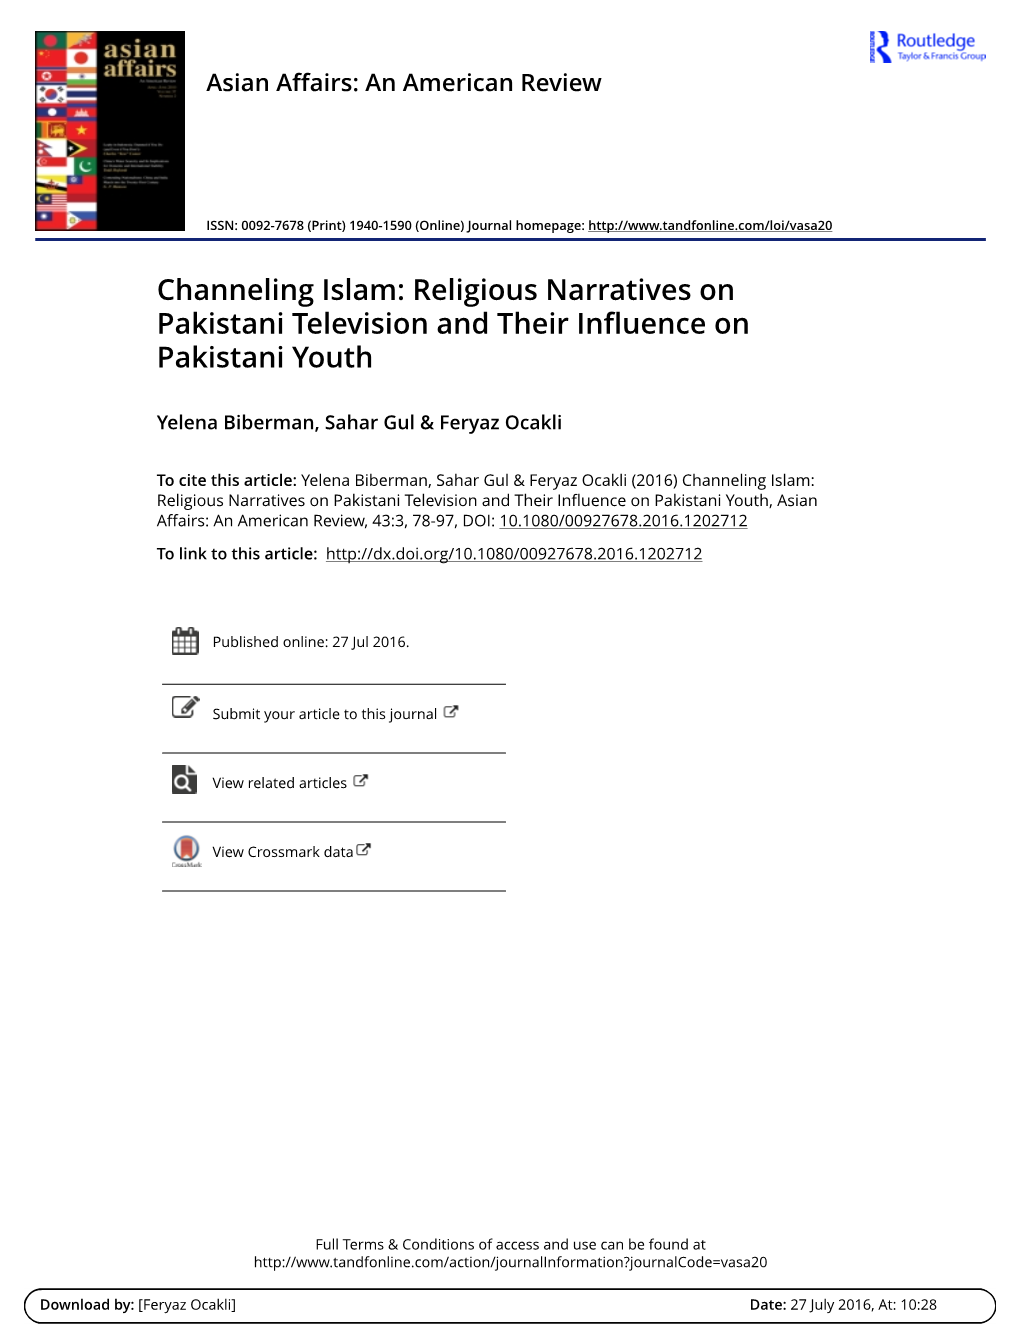 Channeling Islam: Religious Narratives on Pakistani Television and Their Influence on Pakistani Youth